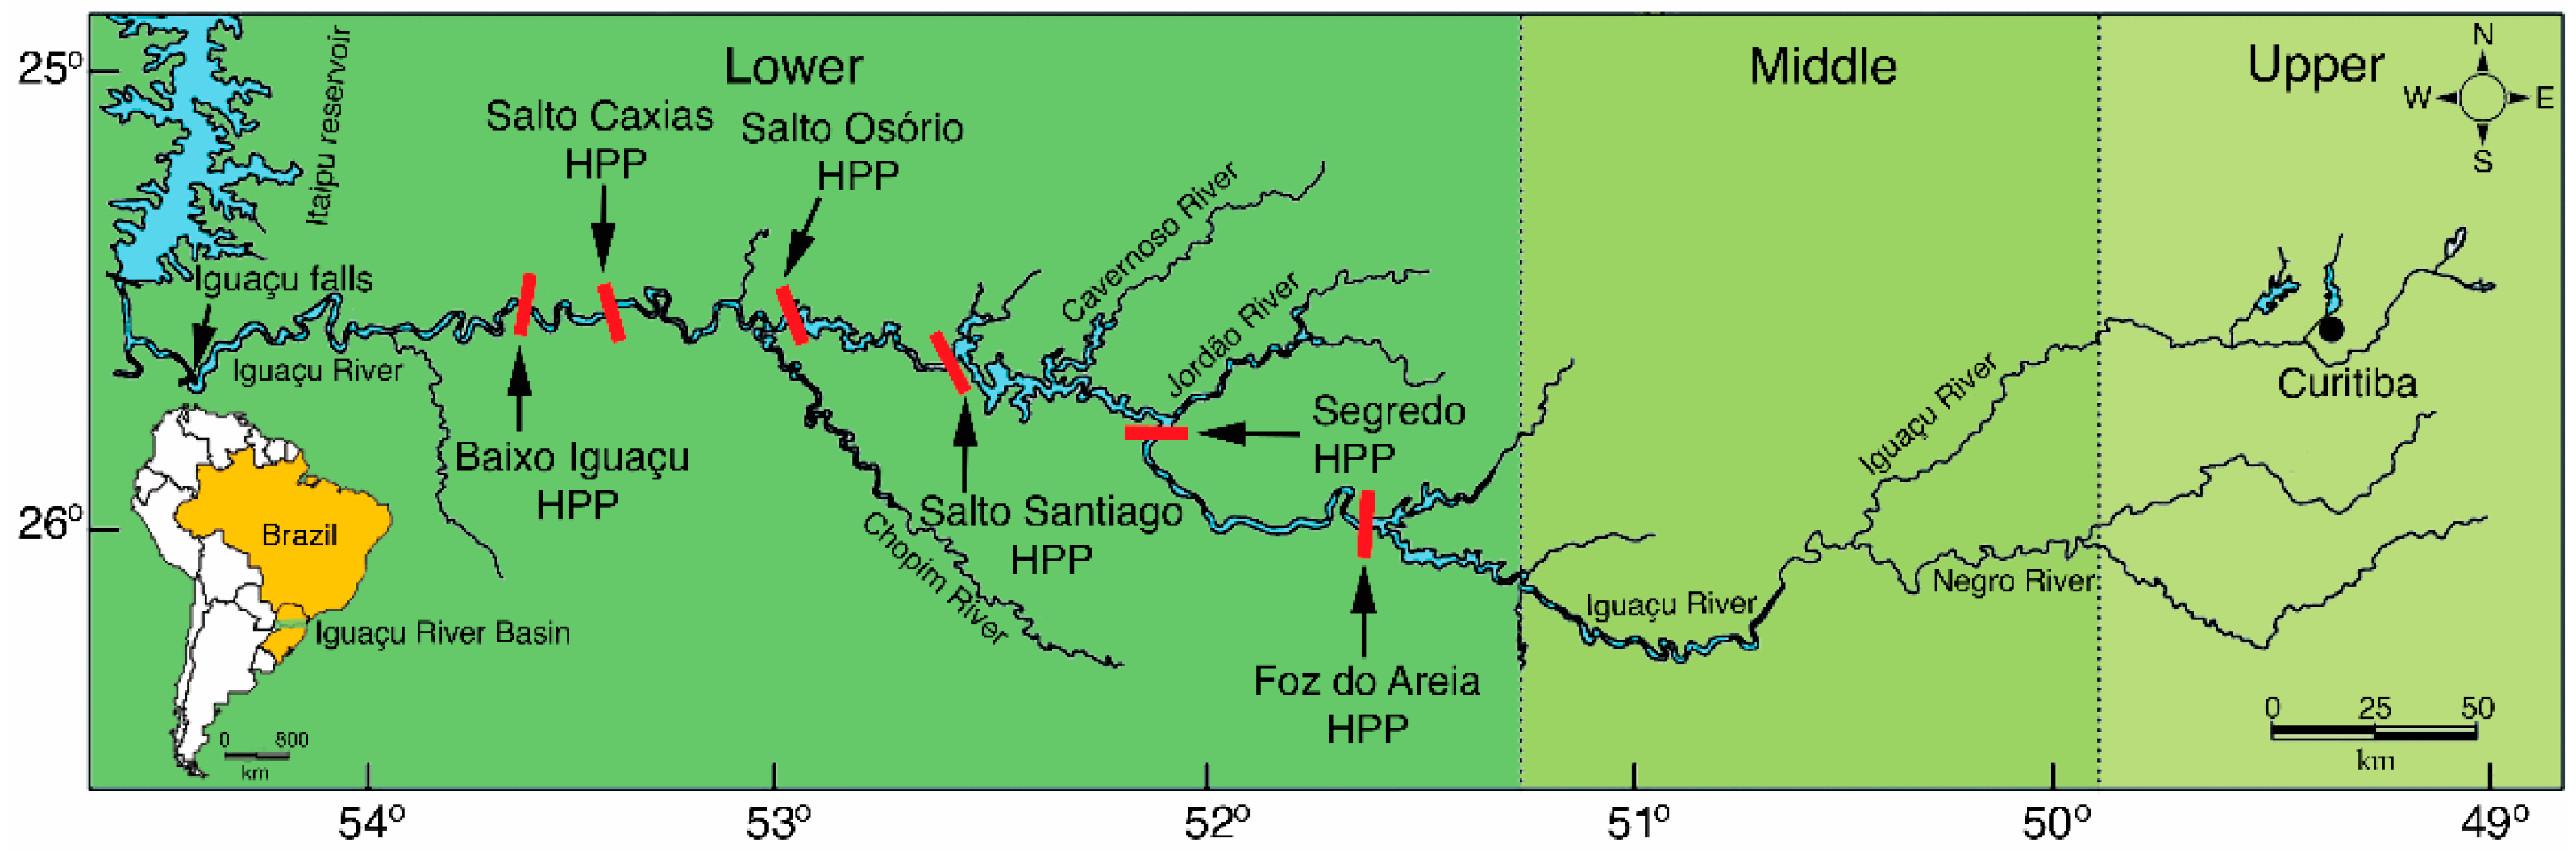 Diversity | Free Full-Text | Genetic Diversity of the  Surubim-Do-Igua&ccedil;u, a Giant Catfish Species Threatened with  Extinction: Recommendations for Species Conservation | HTML